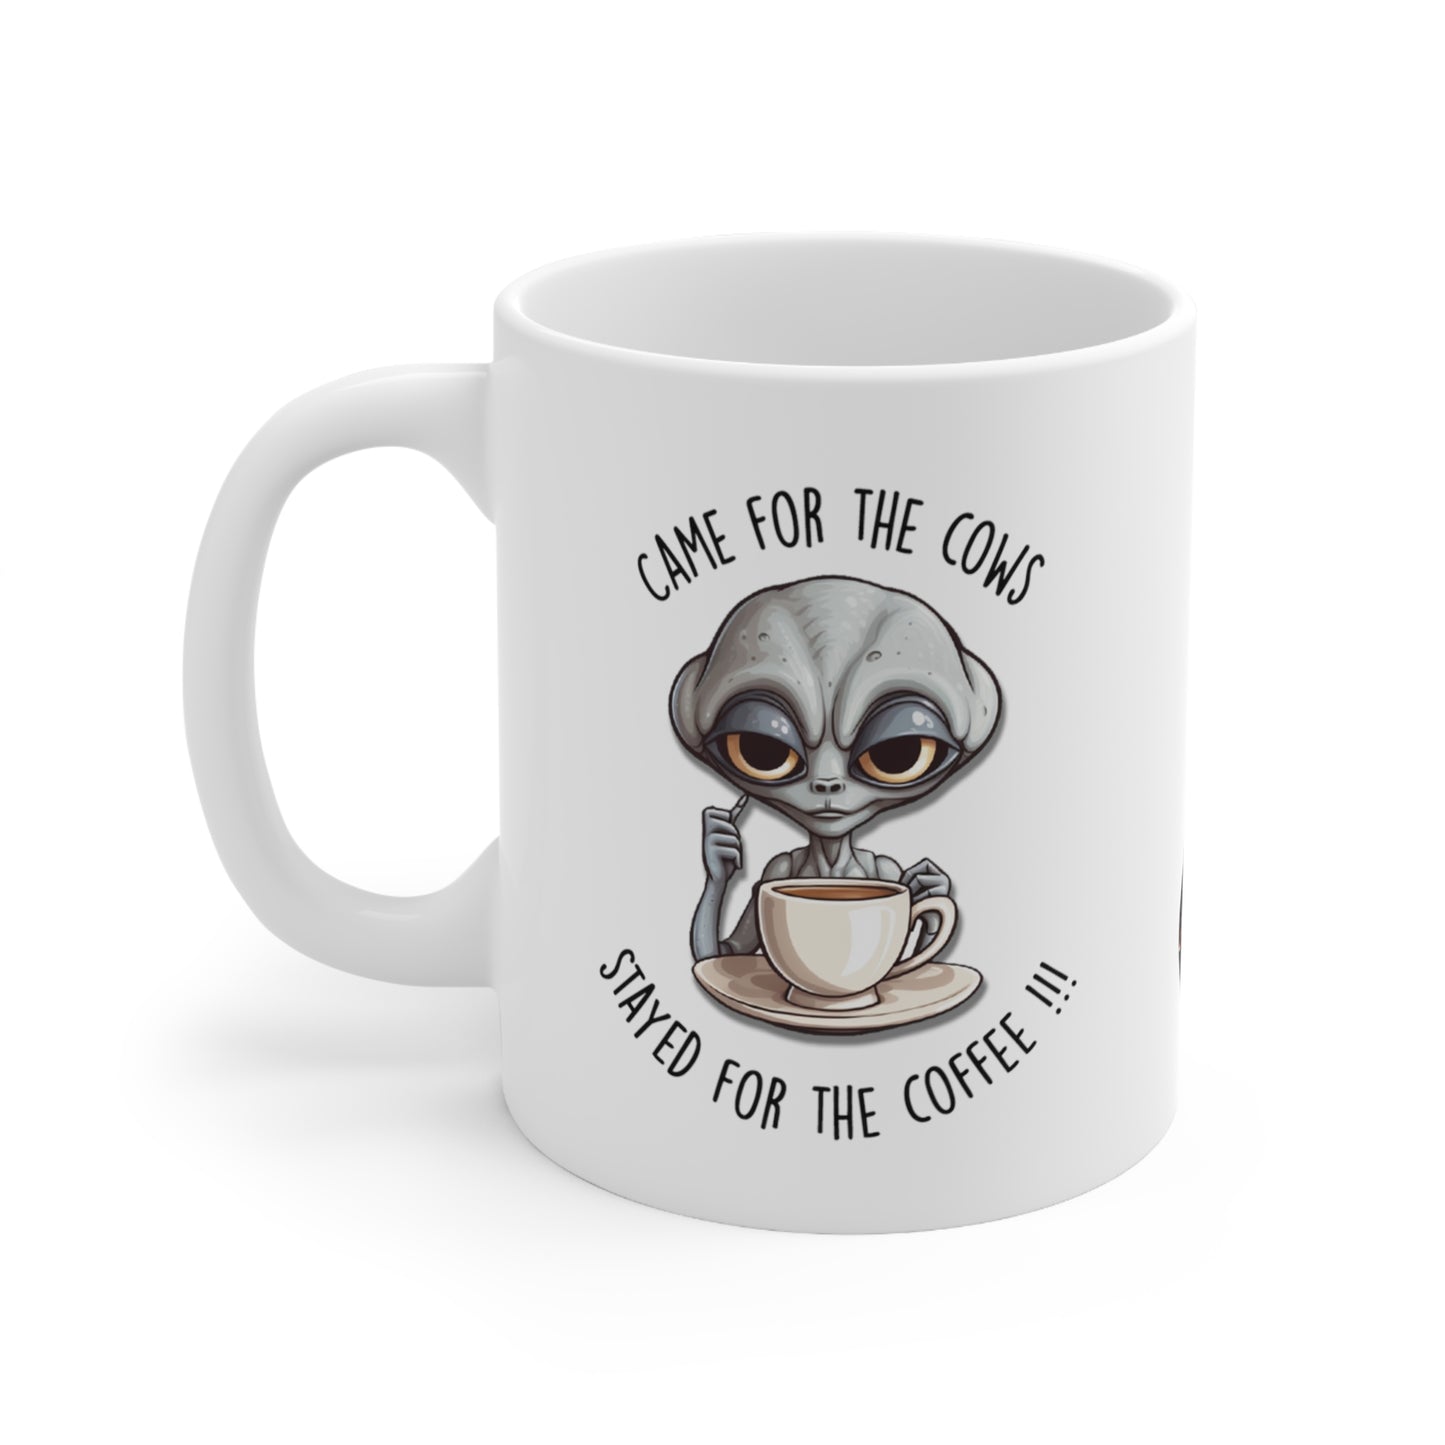 Extraterrestrial Mug Medley: Out Of This World Humor! Set of four (4) mugs.